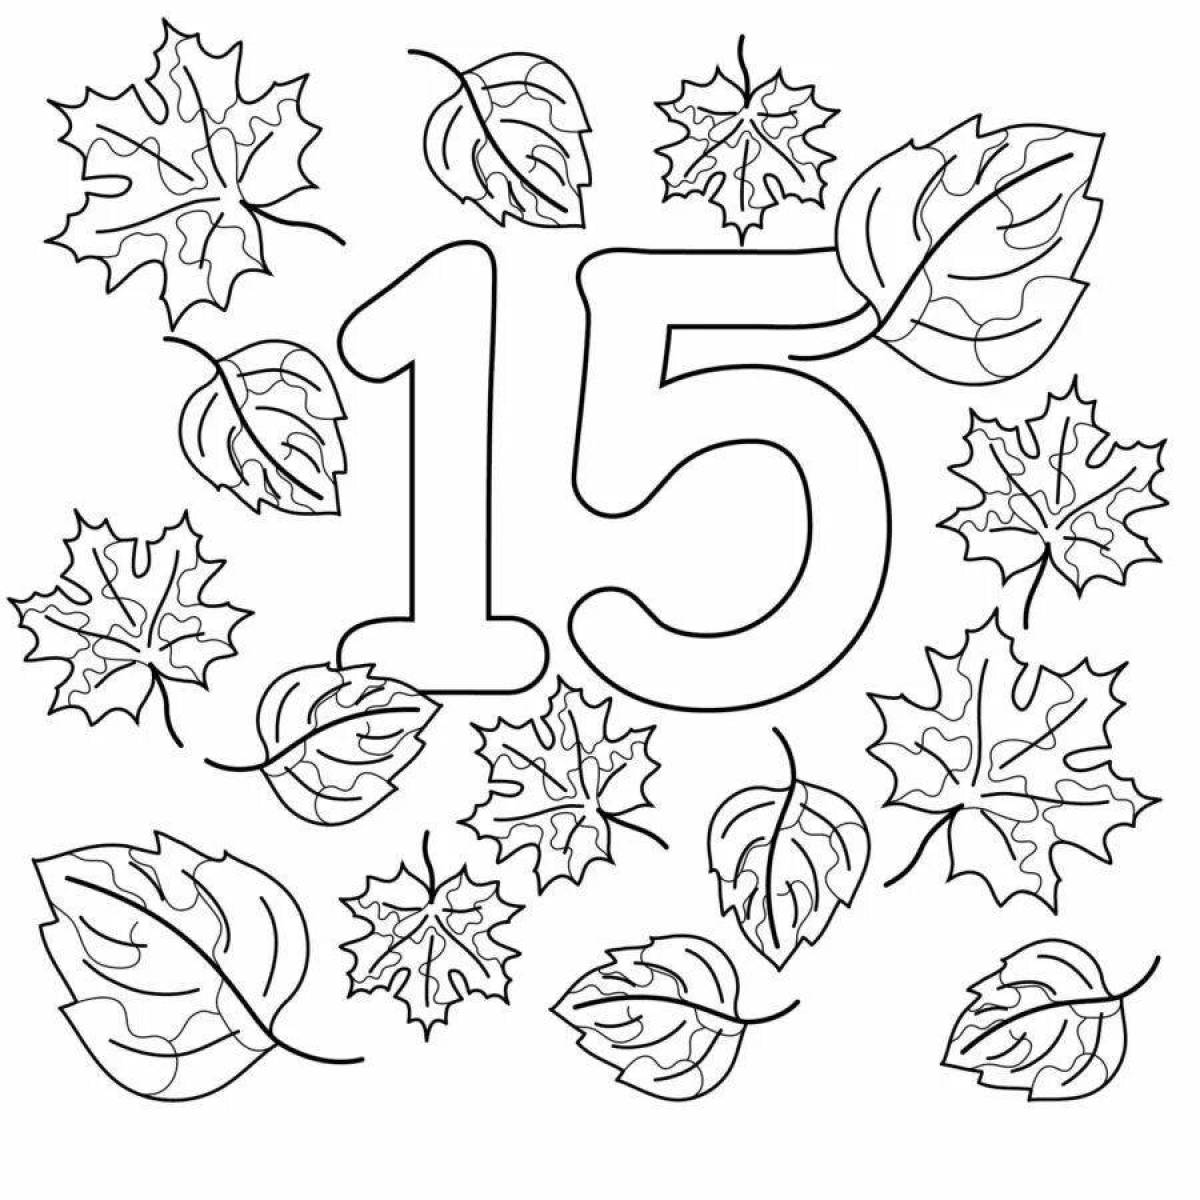 Intriguing coloring book 14-15 years old